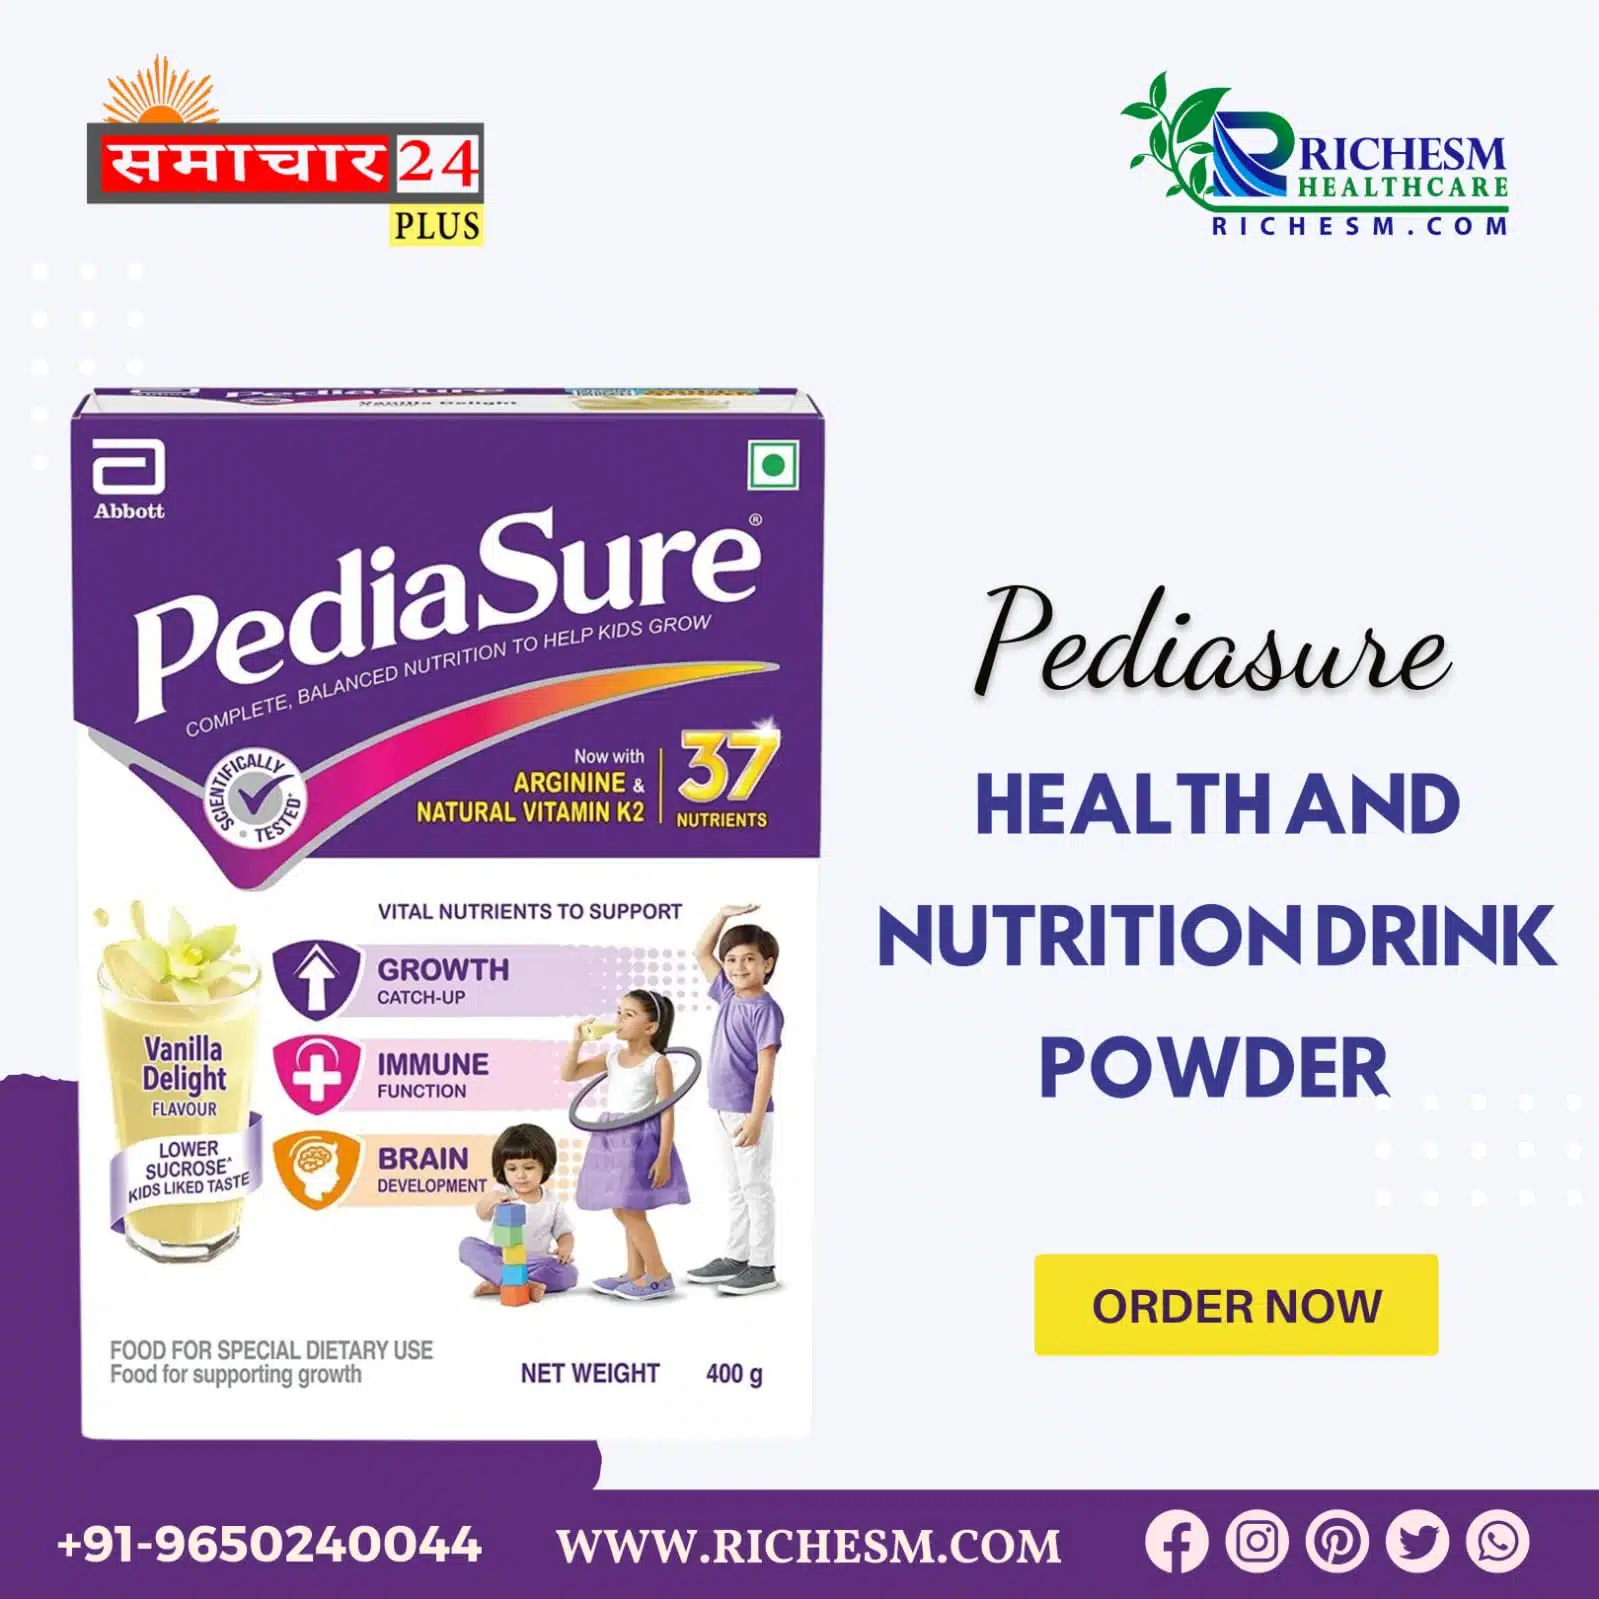 Pediasure Health And Nutrition Drink For Growing Children